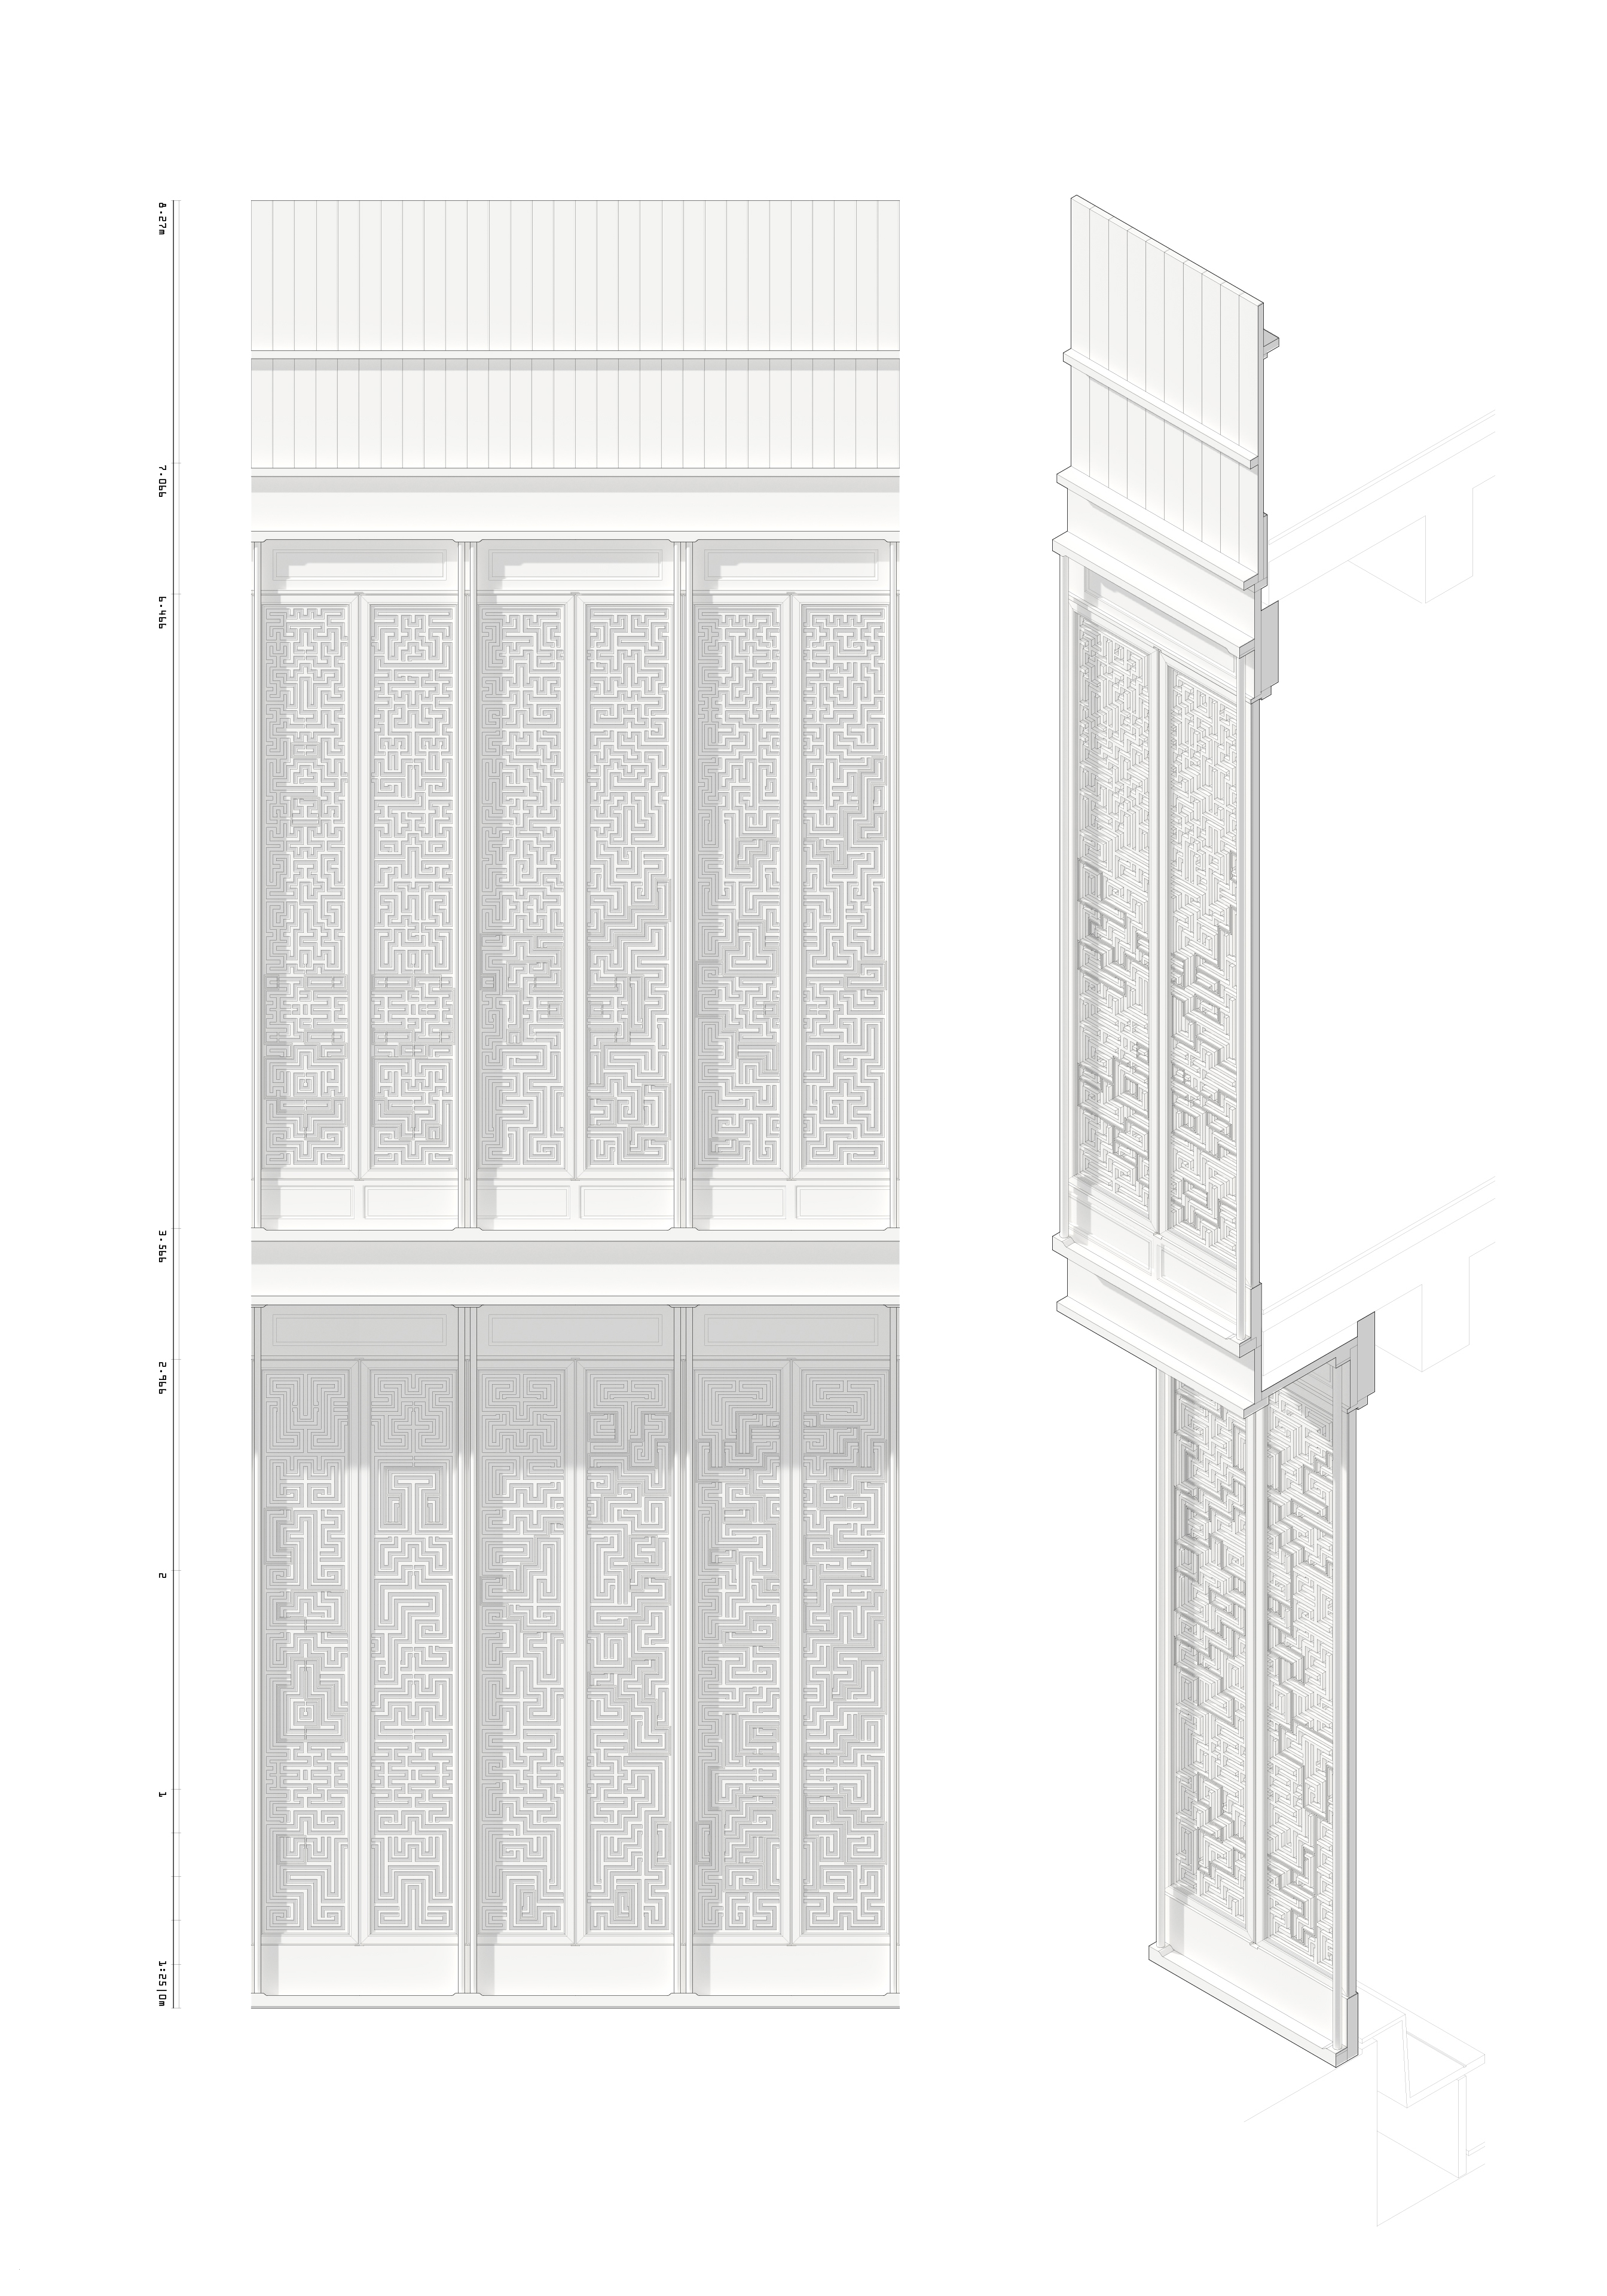 Technical Elevation and Isometric of a Typical Facade Section Through the Ground, First and Roof Floors, Plasticité+, An Implementation of Artificial Intelligence for the Design, Visualization and Digital Fabrication of a Referential Façade of Historical Chinese Art and Architecture, J.Travis Bennett Russett